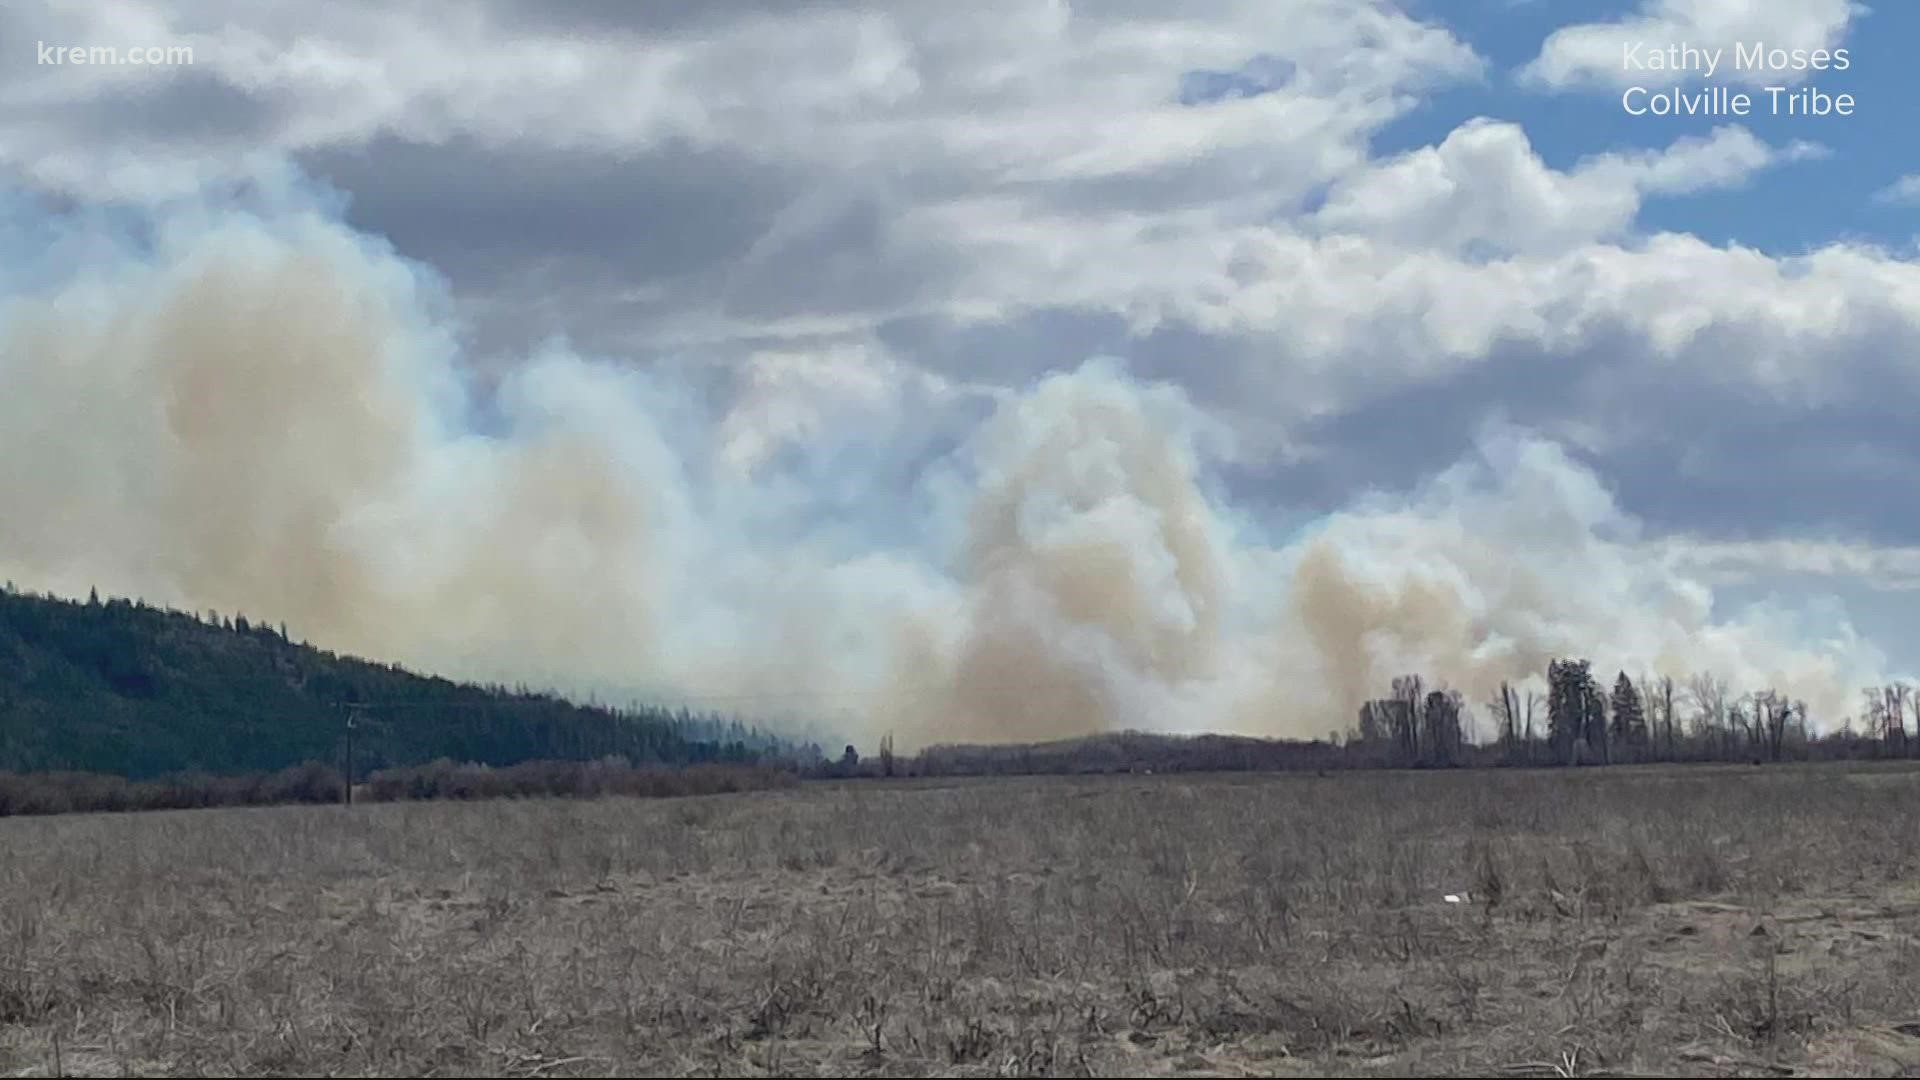 The wildfire is reported to have burned around 200 acres of land.